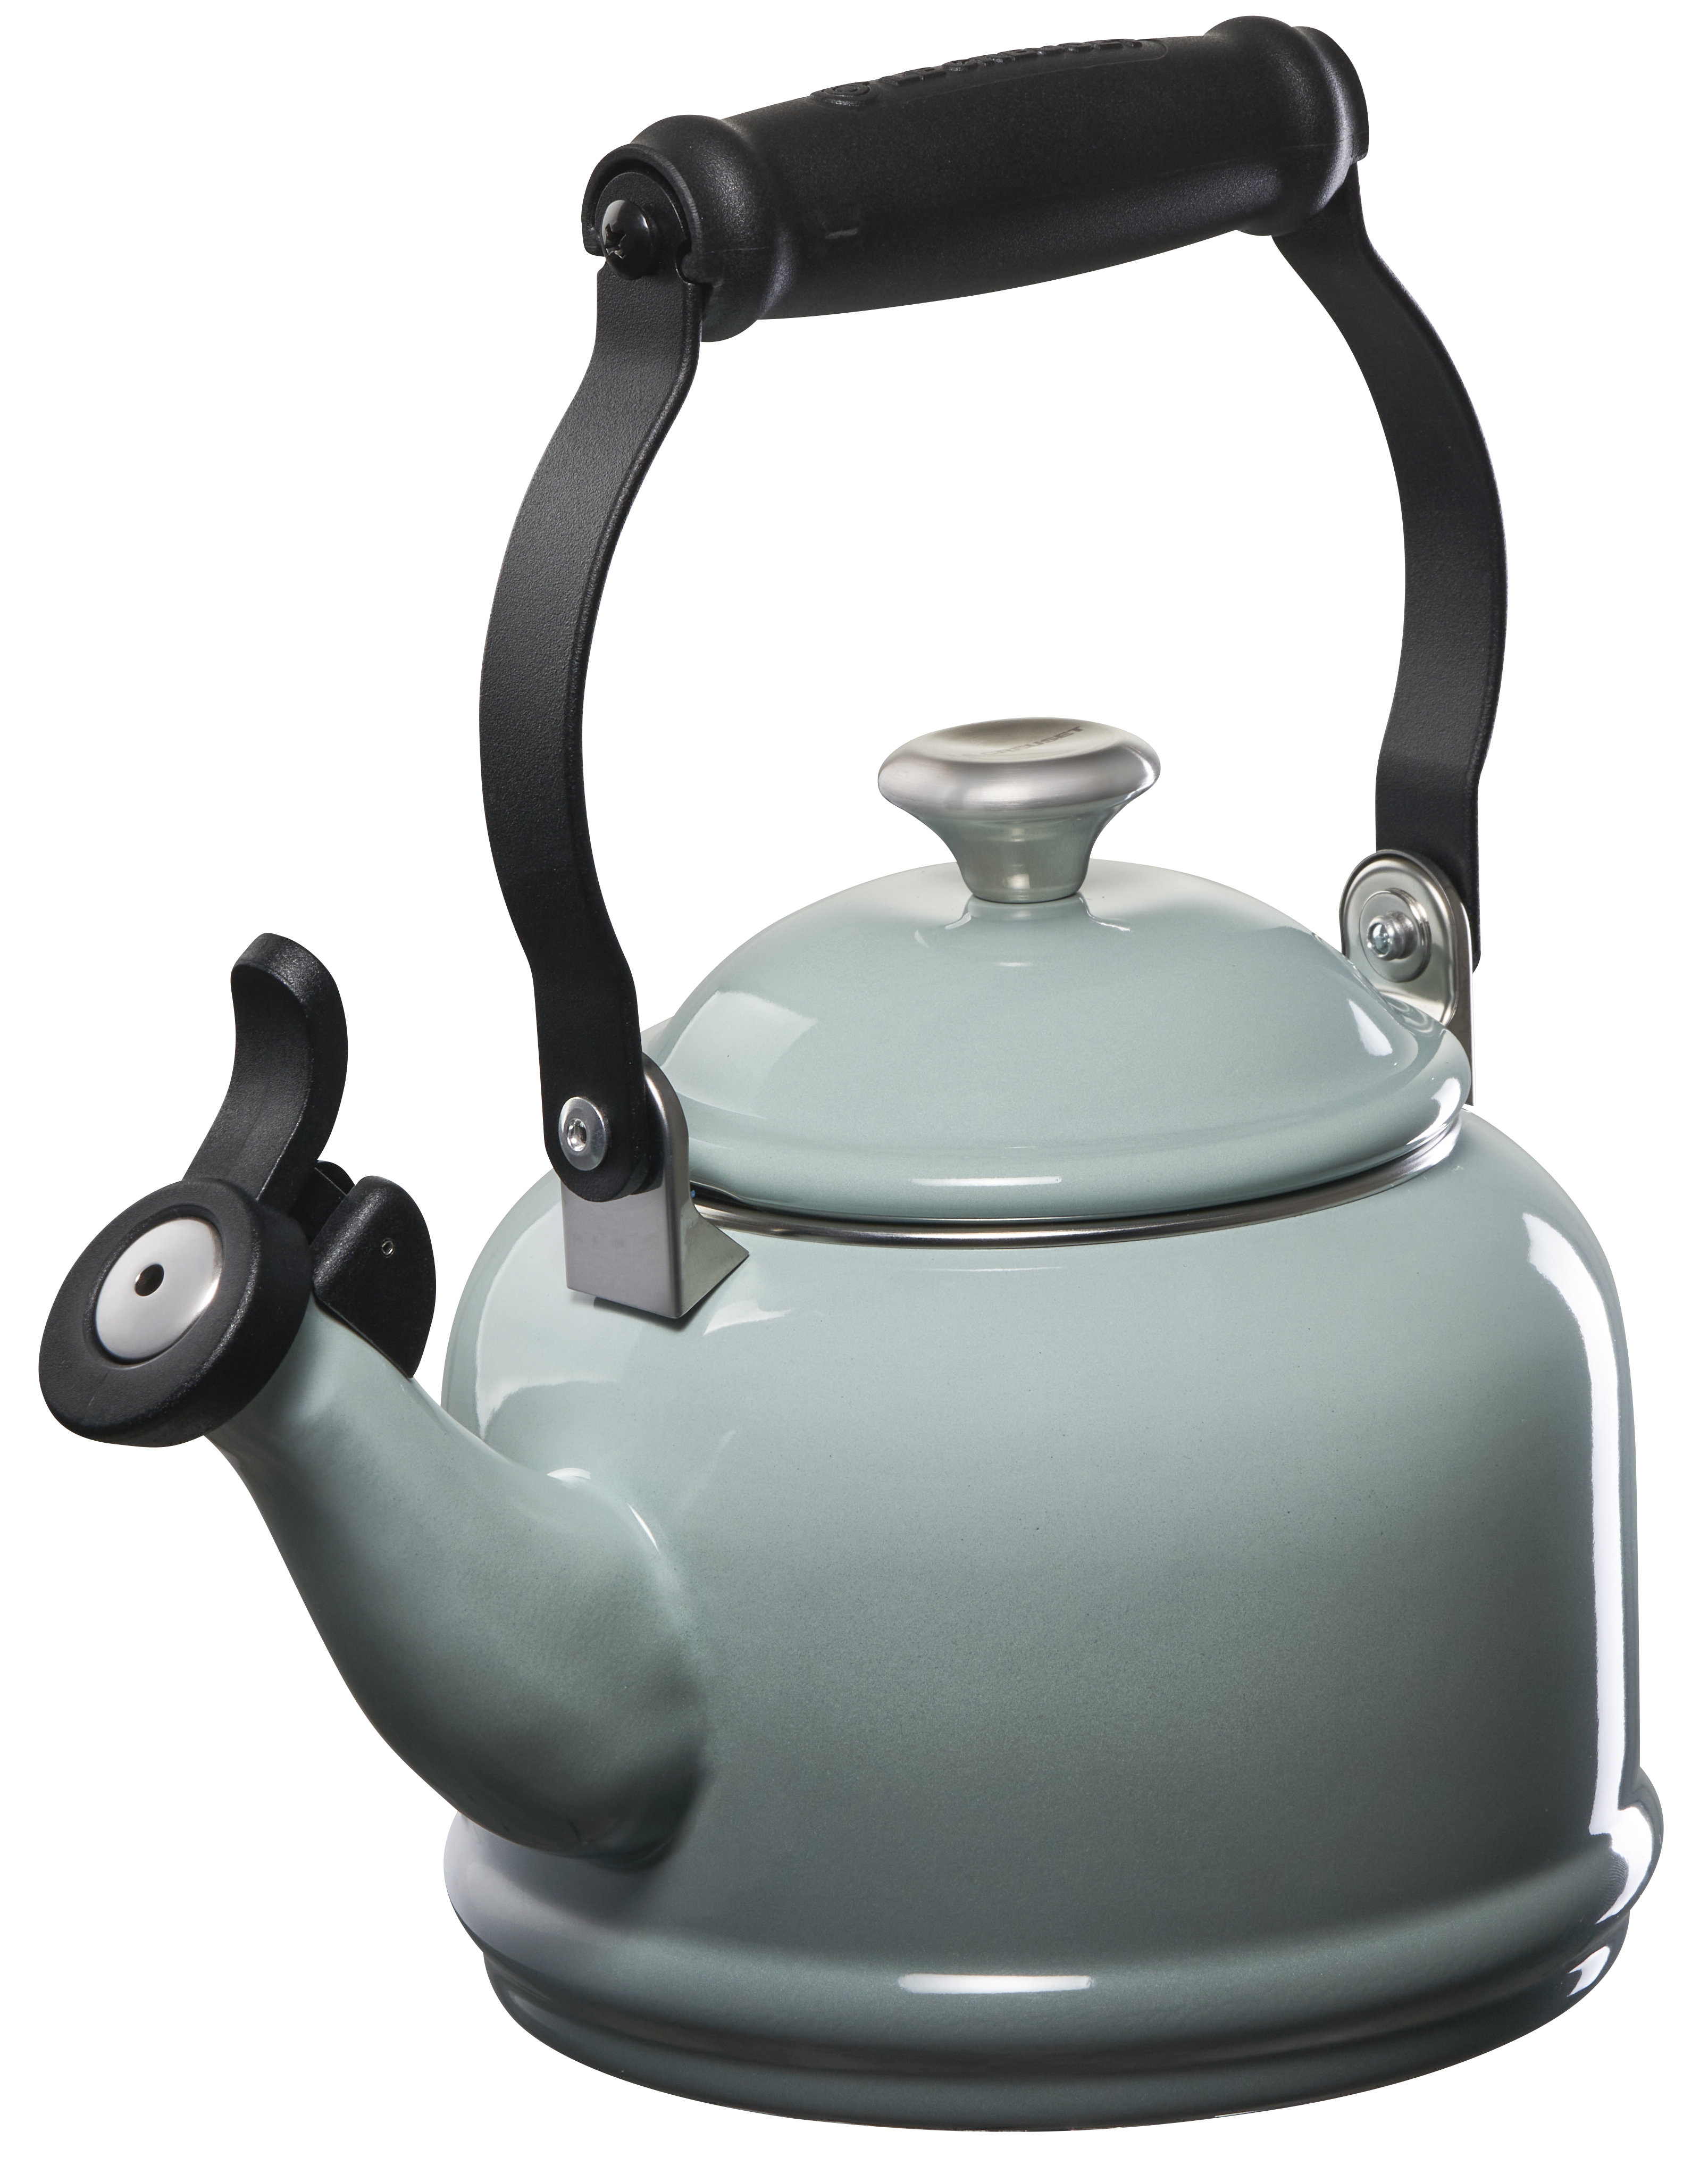 Le Creuset Classic Whistling Tea Kettle with Stainless Steel Knob - Oyster